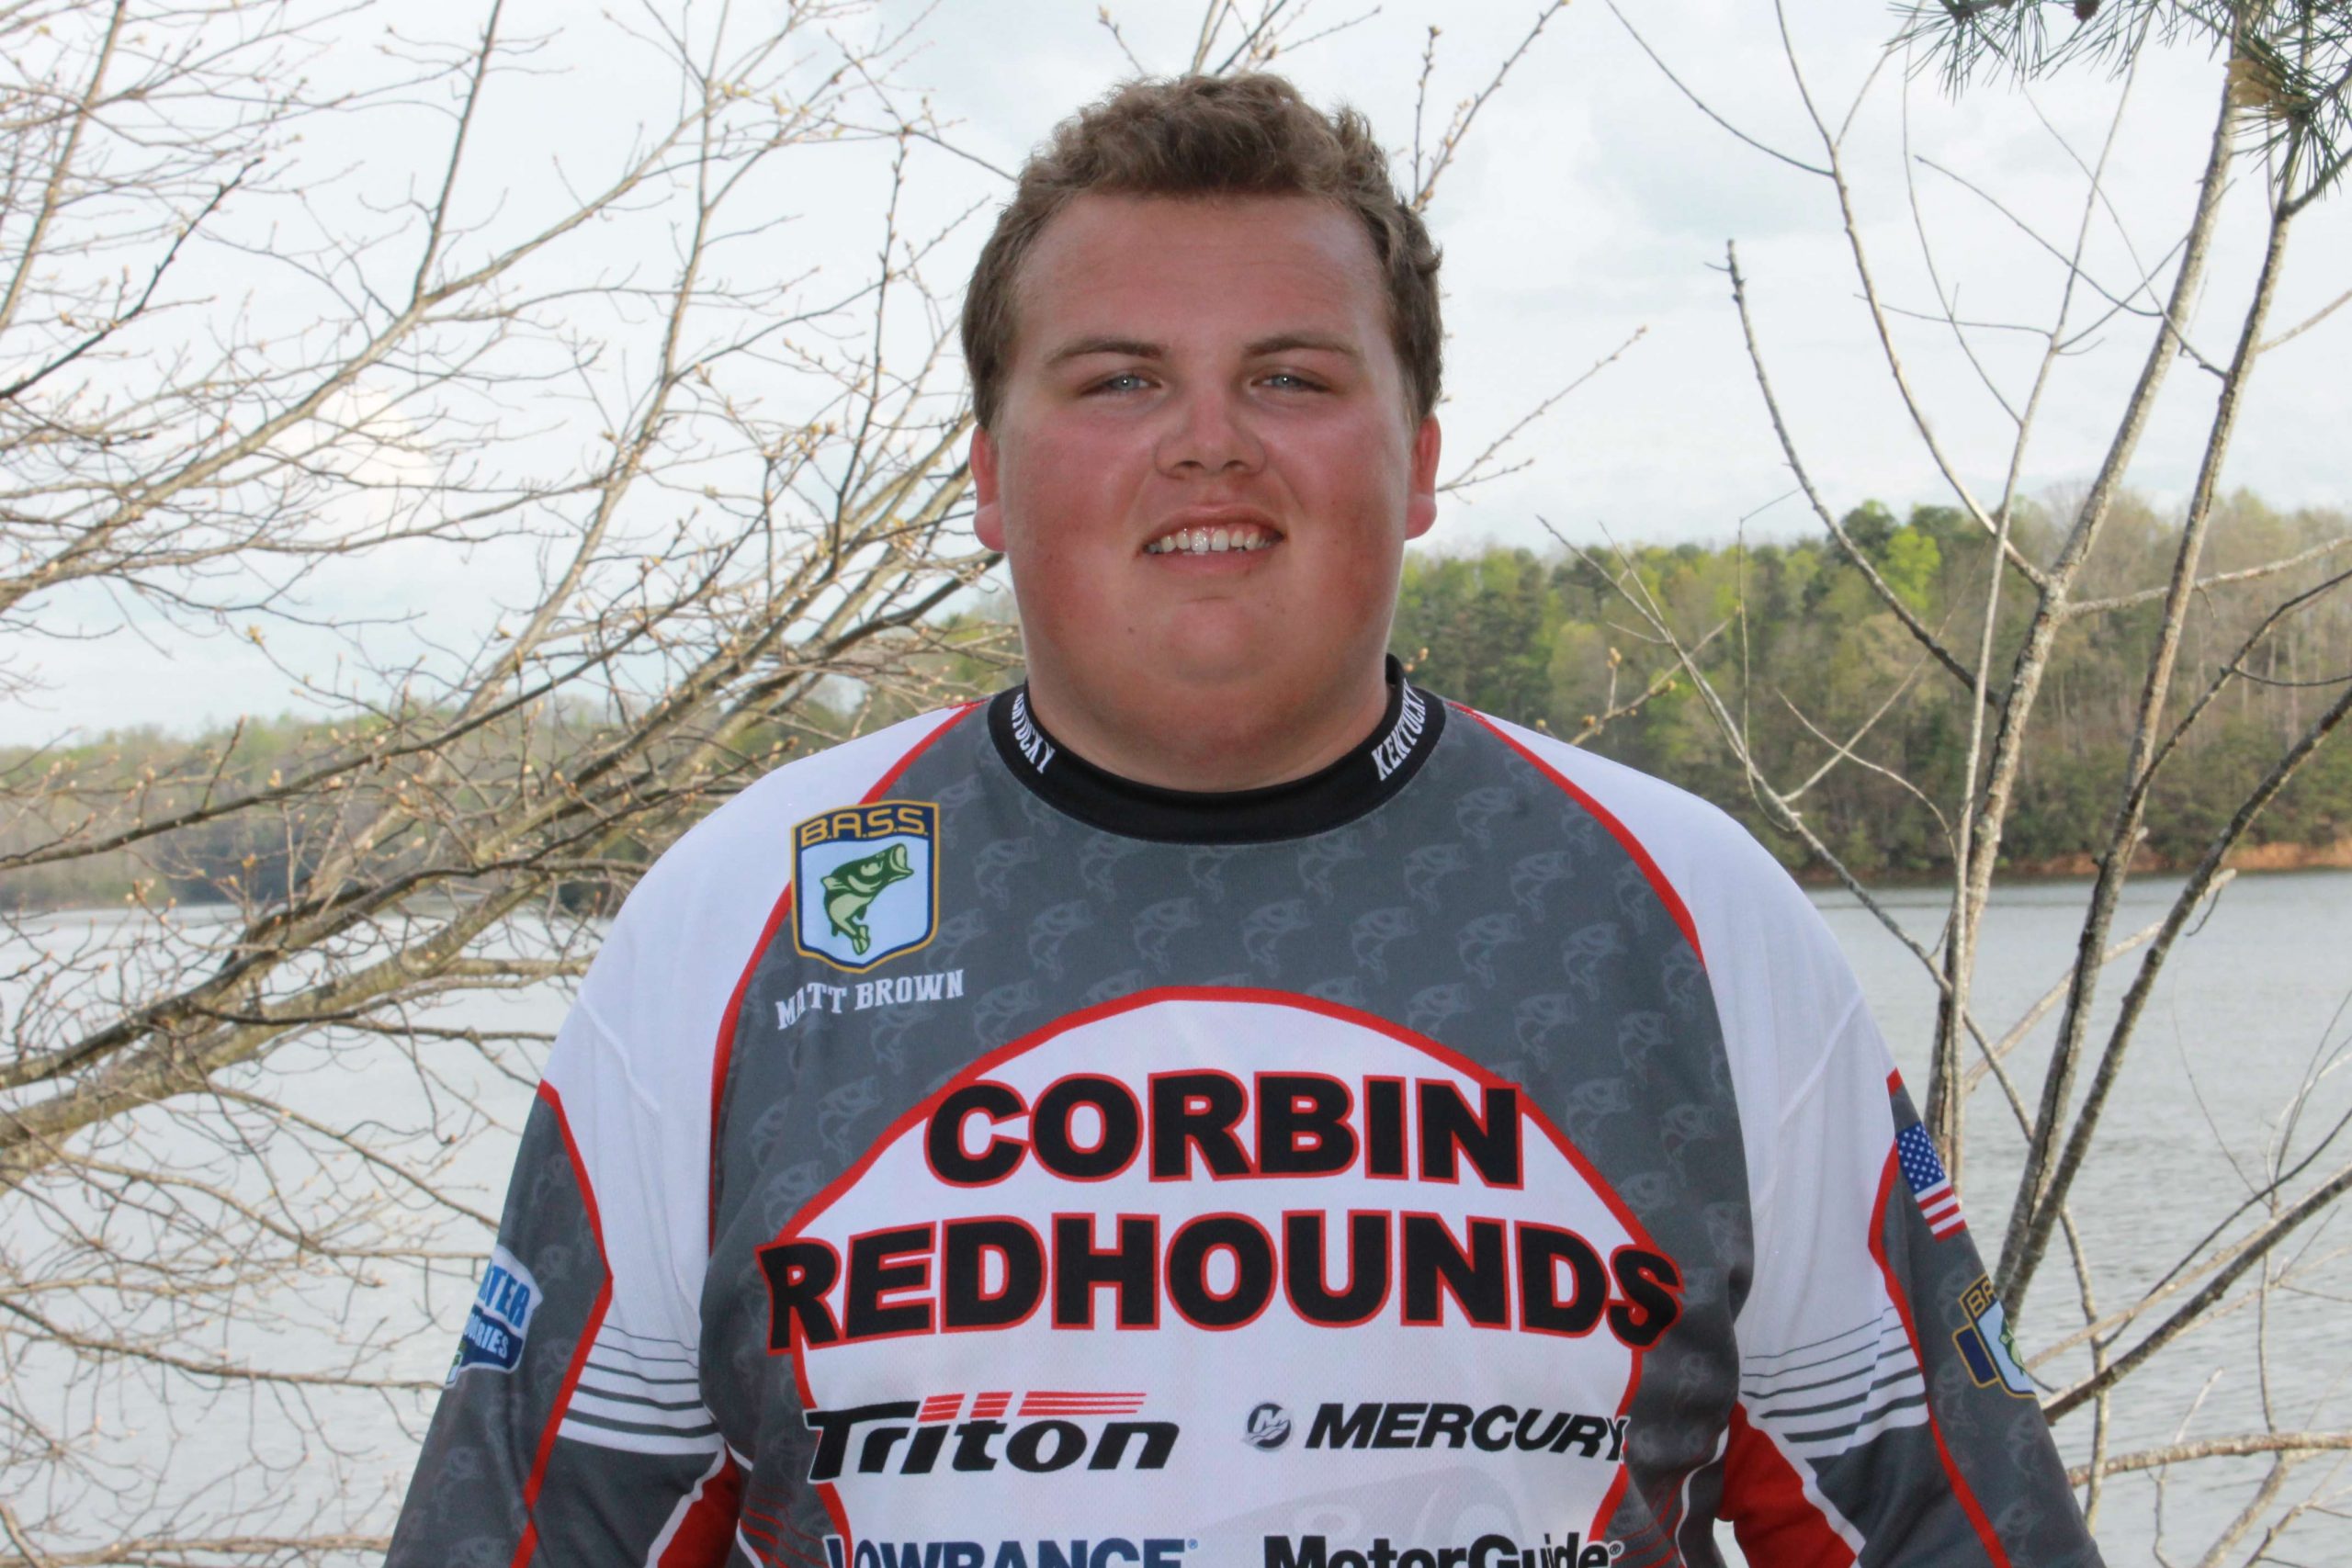 <p>Kentucky: Matt Brown</p>
<p>
Brown is a junior at Corbin High School. He qualified for the 2015 Costa Bassmaster High School Classic and the 2014 Costa Bassmaster High School National Championship, and he won the first Bradley Roy High School Open in 2013. Brown has worked behind the scenes in several local charities, and he volunteers for Hooked on Fishing, Not on Drugs.